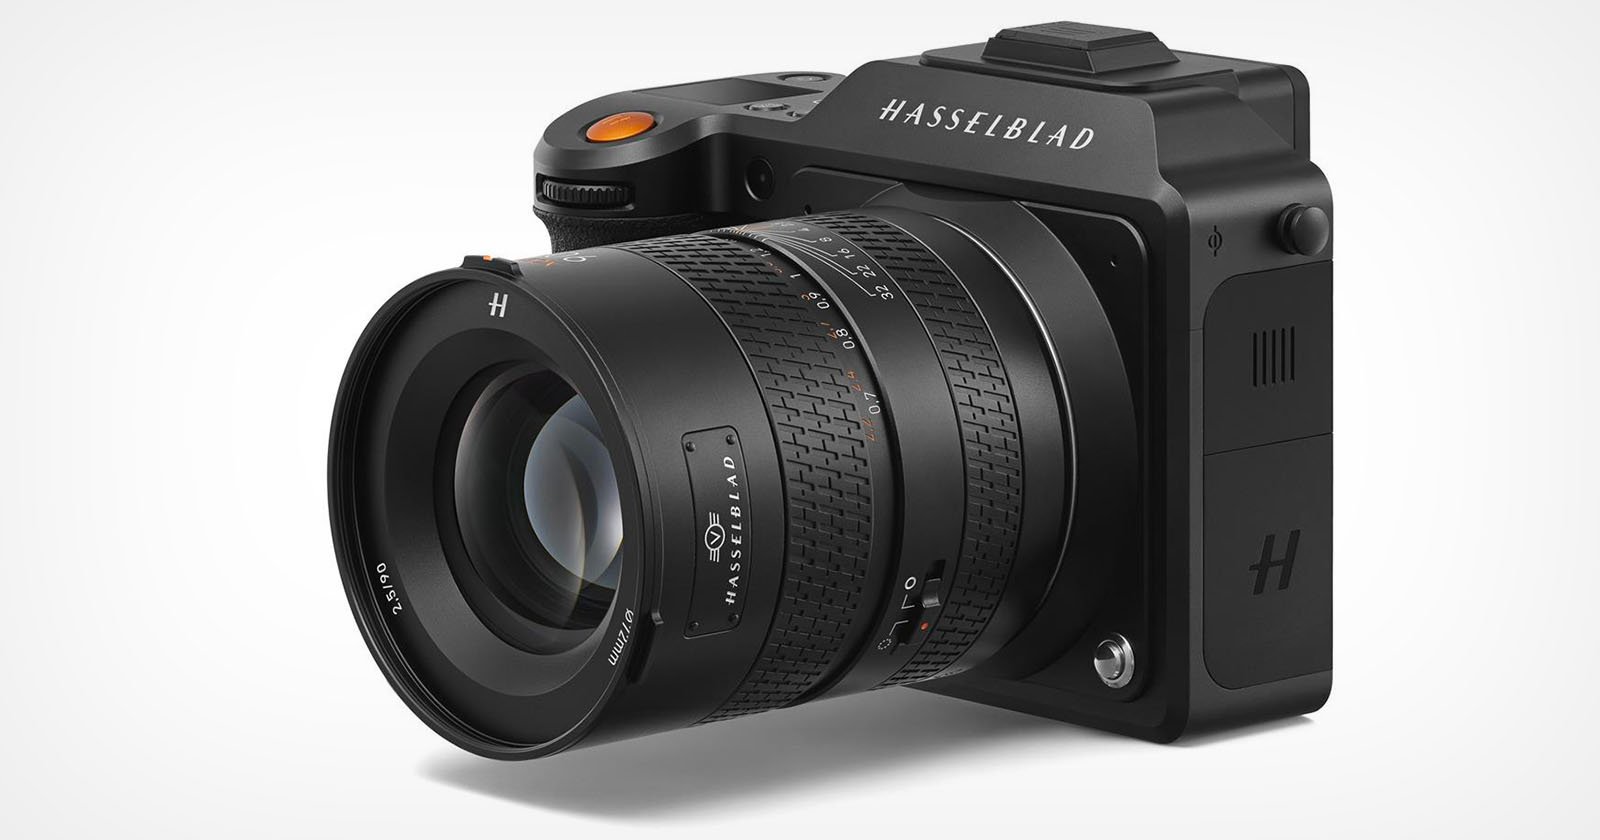  hasselblad xcd 90mm finally releases x2d 100c gets 